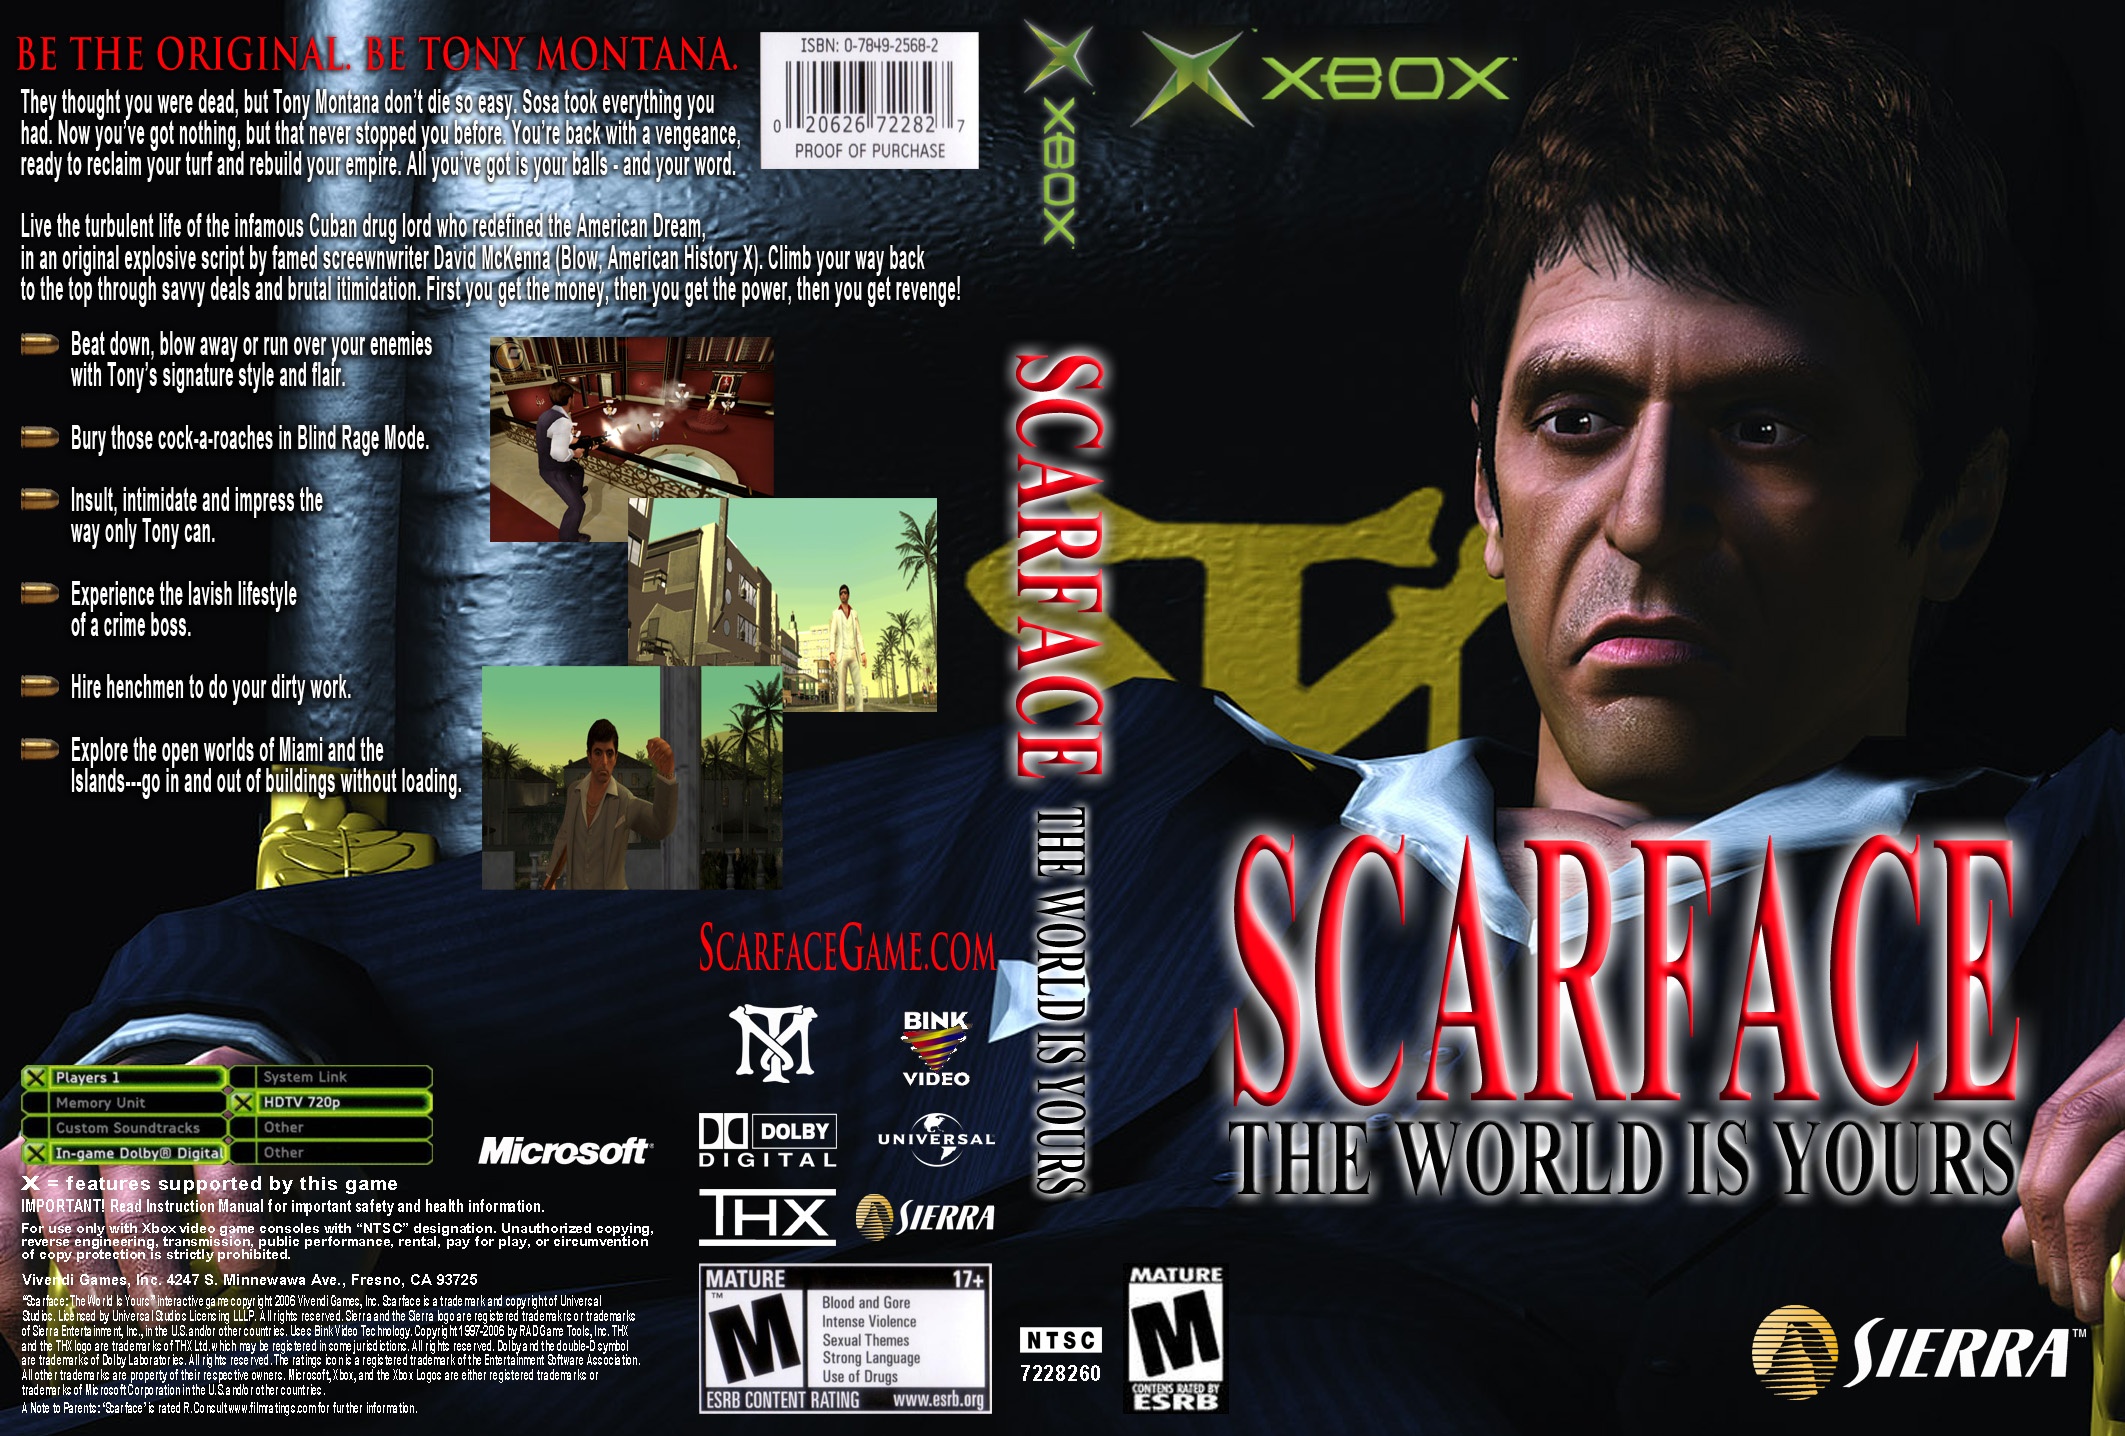 Scarface The World Is Yours CUSTOM box cover